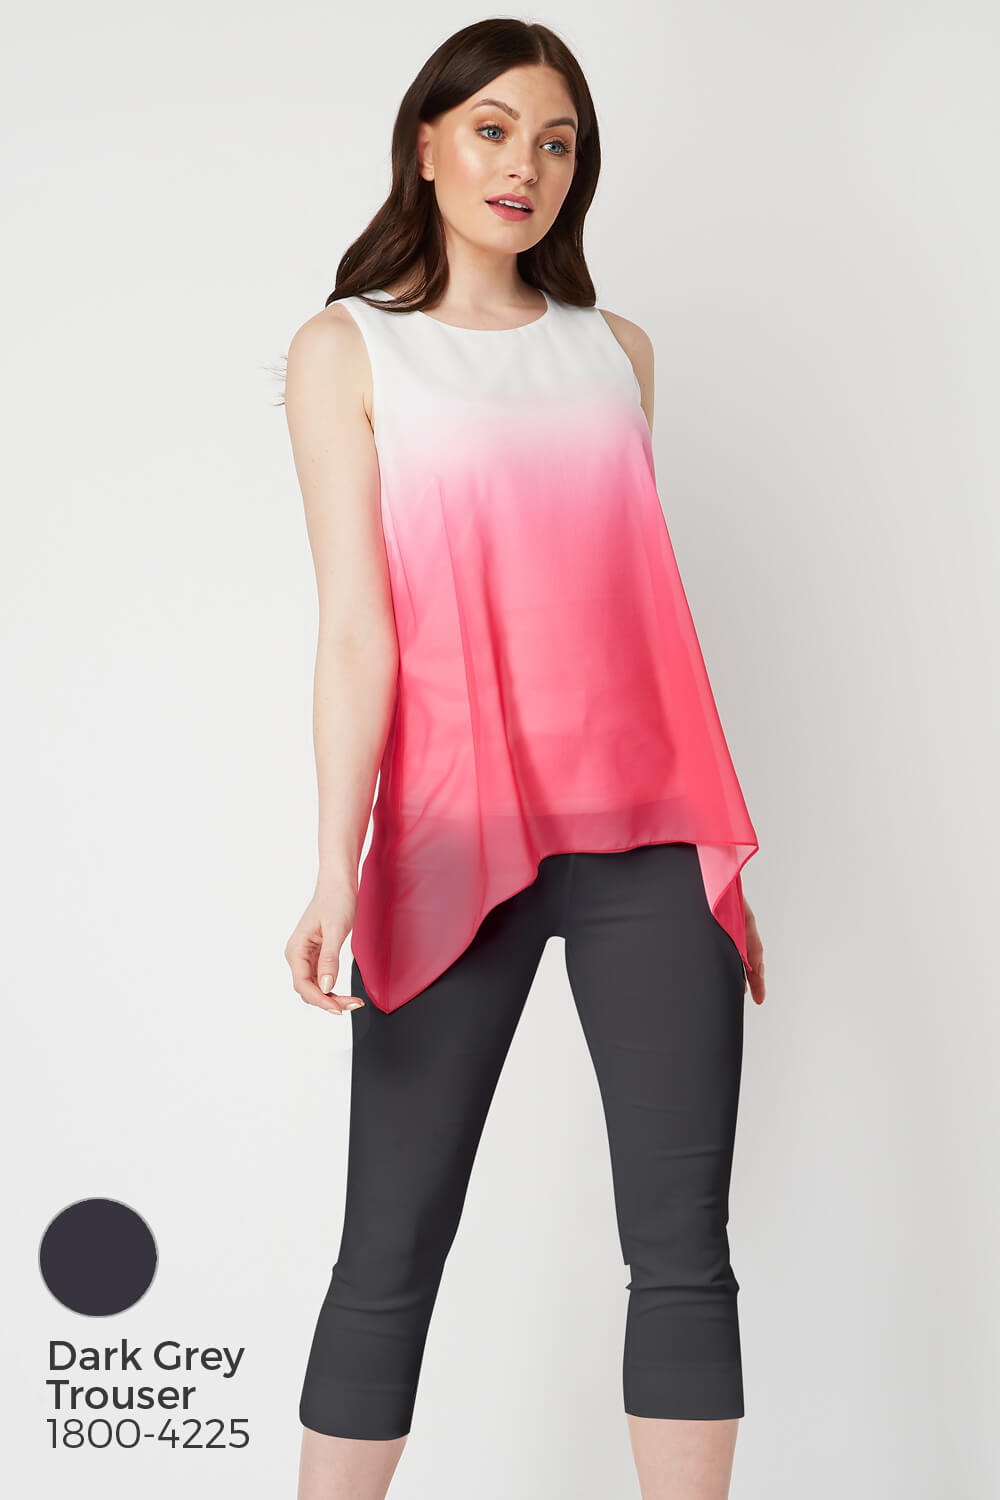 PINK Ombre Print Overlay Top, Image 8 of 8